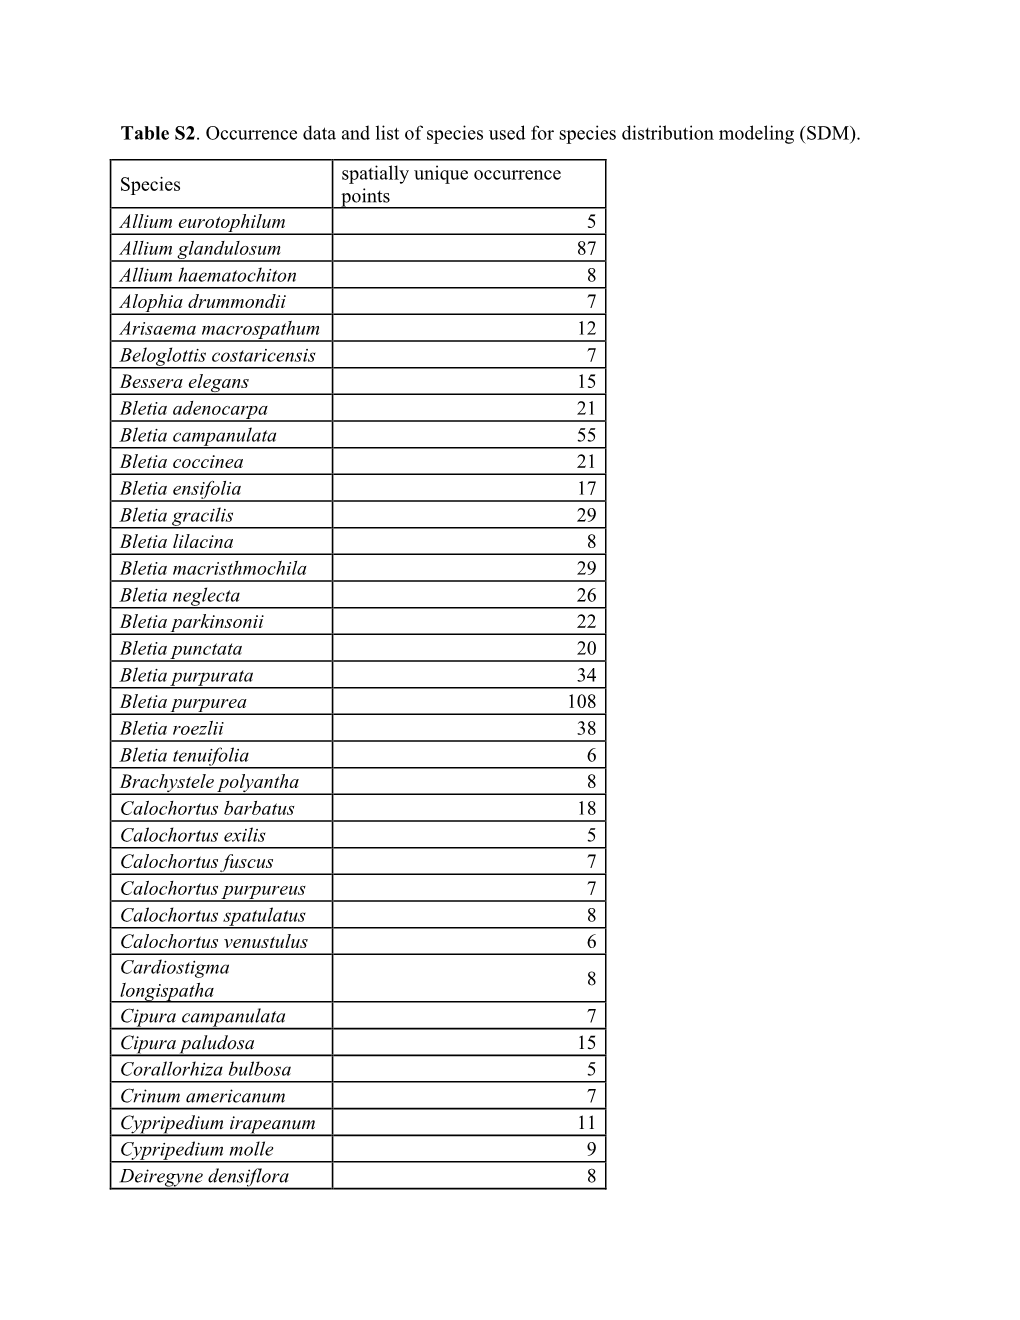 Table S2. Occurrence Data and List of Species Used for Species Distribution Modeling (SDM)